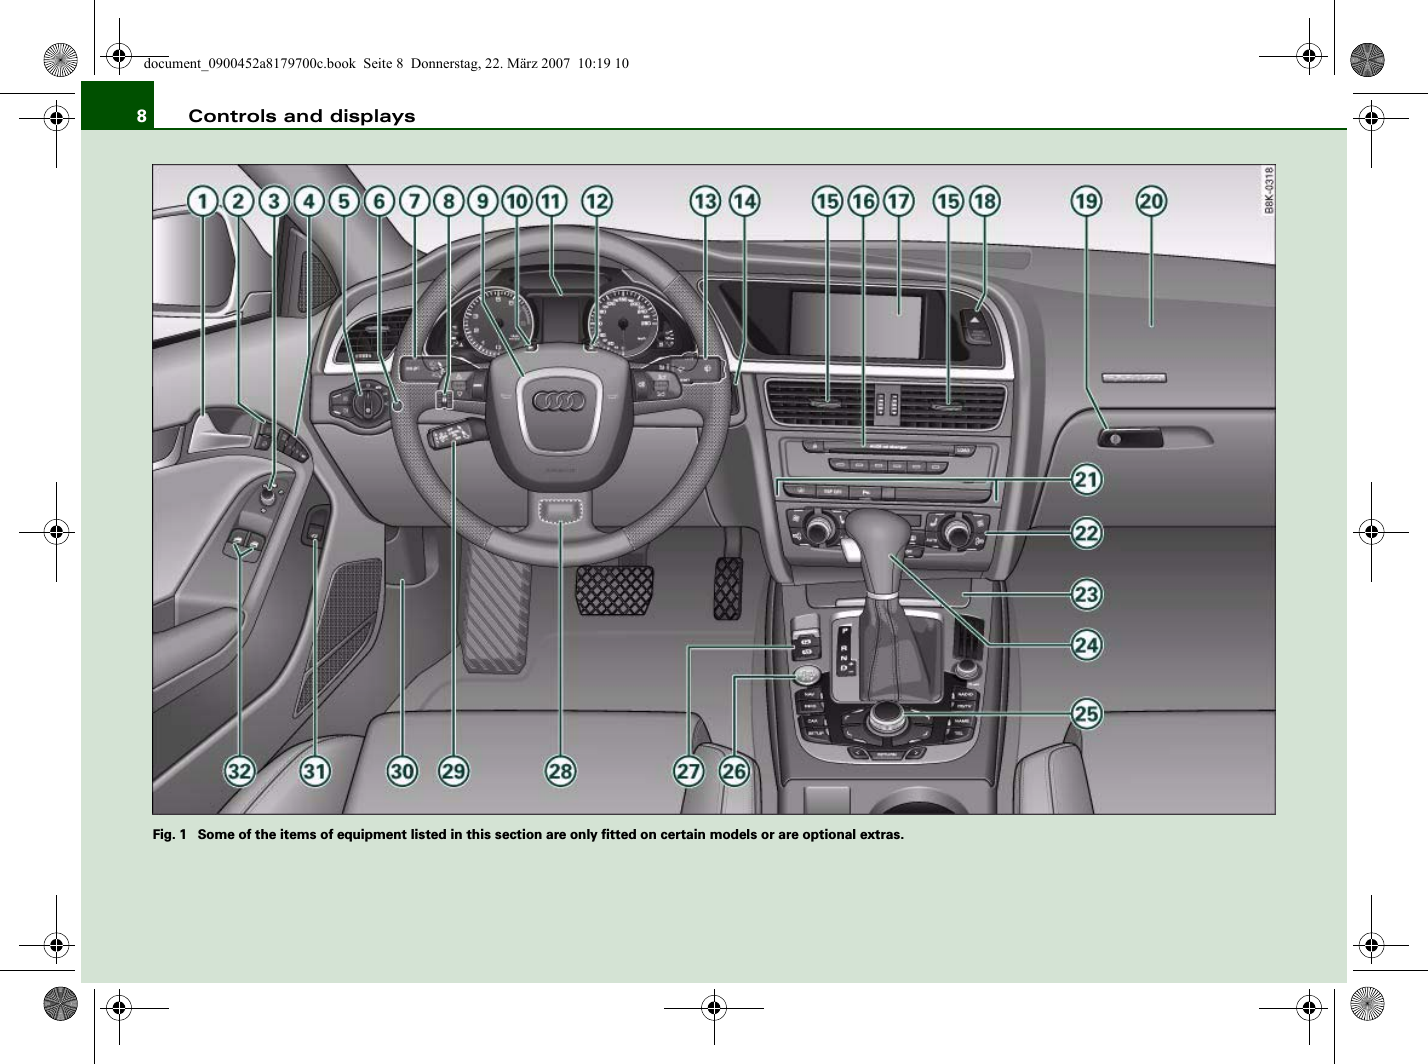 Controls and displays8Fig. 1  Some of the items of equipment listed in this section are only fitted on certain models or are optional extras.document_0900452a8179700c.book  Seite 8  Donnerstag, 22. März 2007  10:19 10